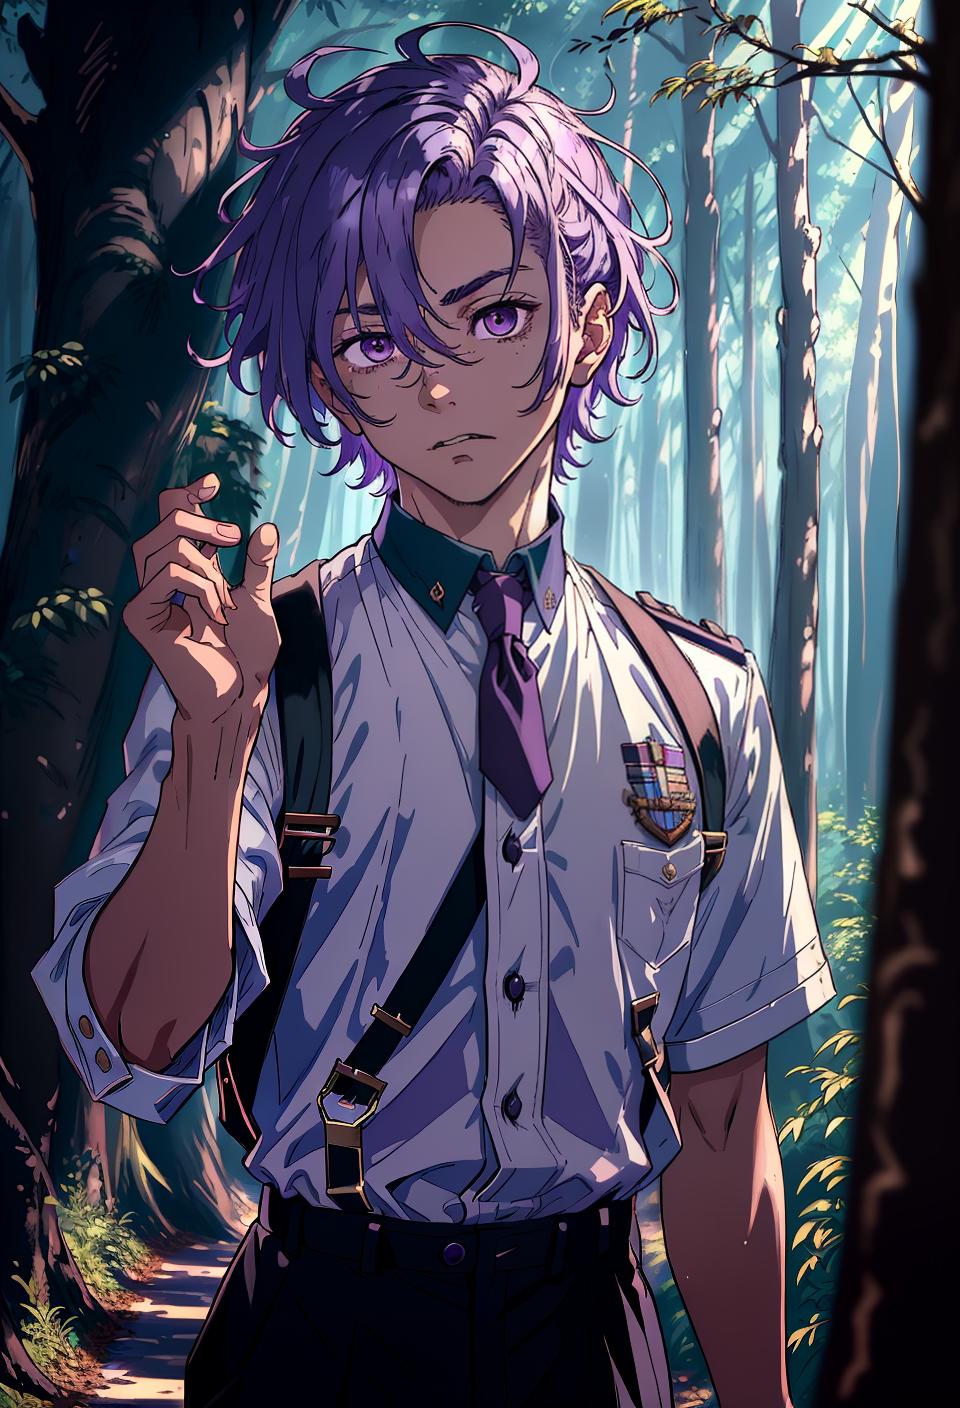  ((trending, highres, masterpiece, cinematic shot)), 1boy, young, male student uniform, forest scene, medium-length messy light purple hair, side locks hairstyle, narrow dark eyes, high class, elegant personality, smug expression, tanned skin, morbid, energetic